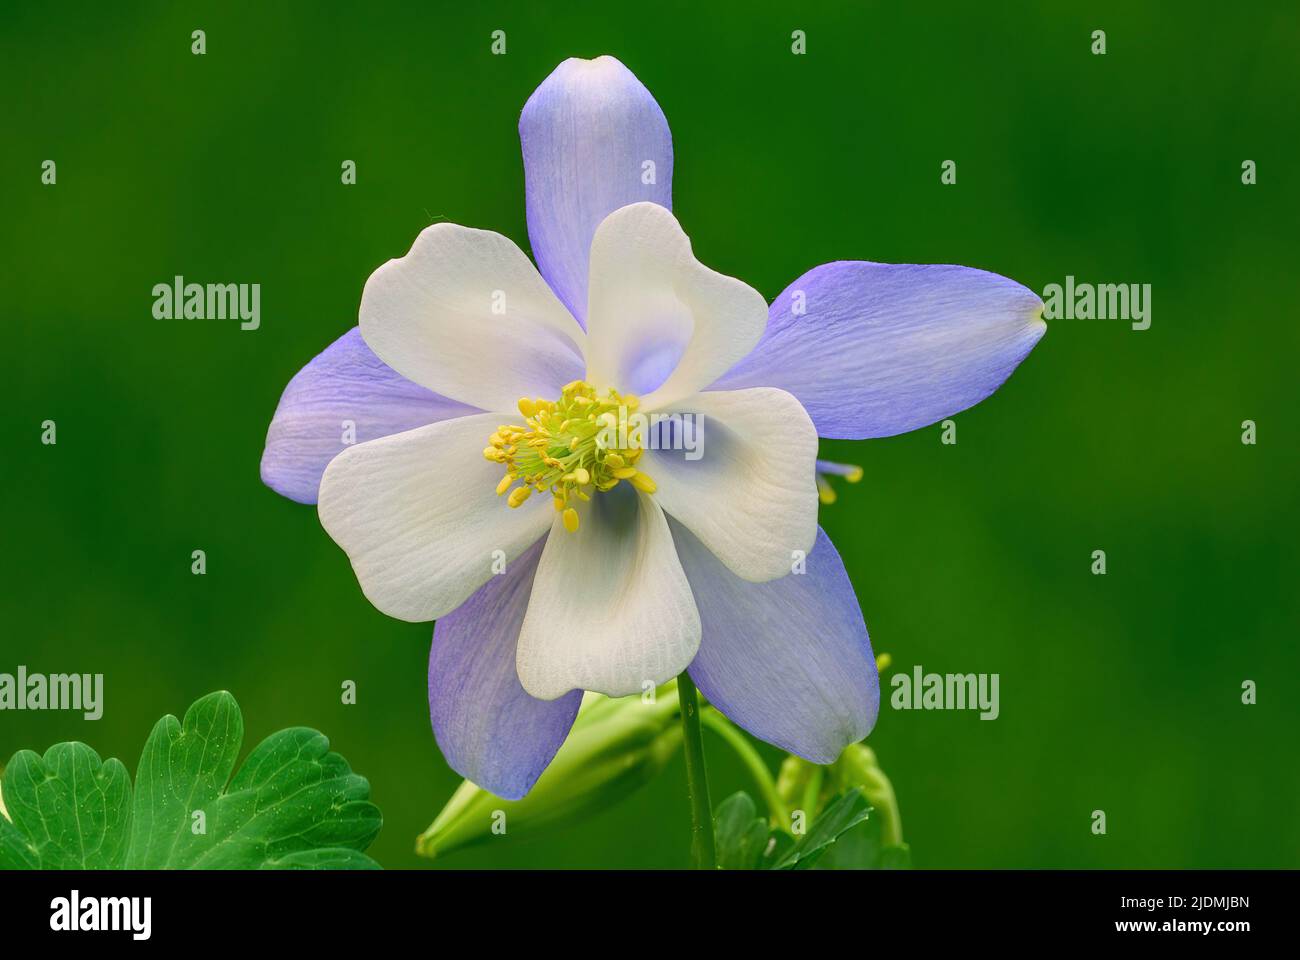 Aquilegia coerulea, columbine flower Colorado blue white Front view, closeup. Blurred natural green background, isolated copy space. Trencin Slovakia. Stock Photo